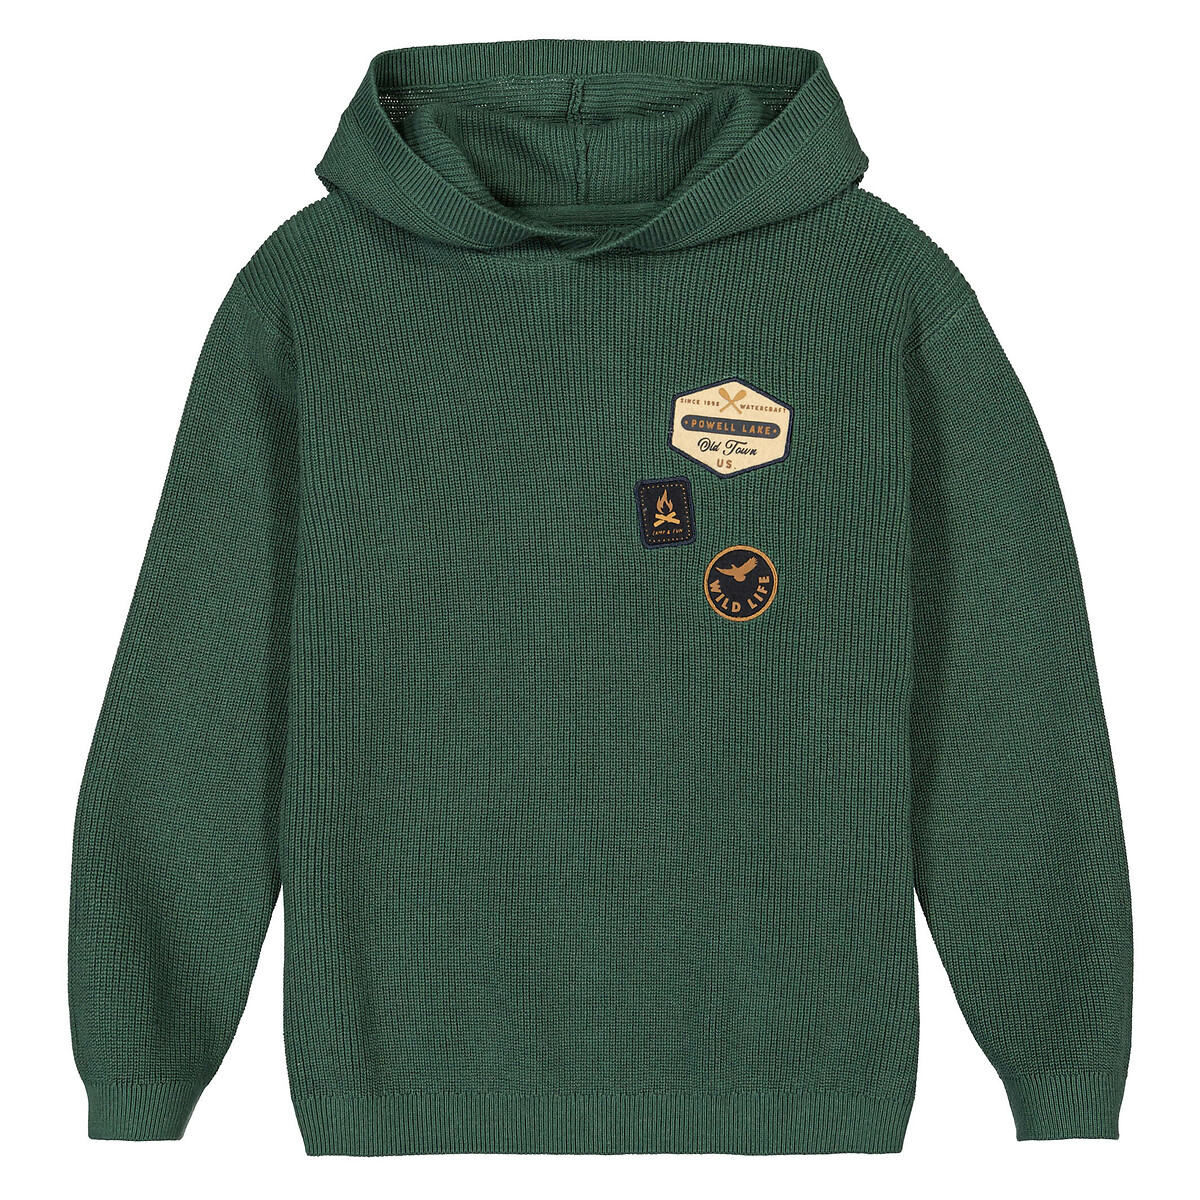 Organic Cotton Hoodie in Fine Knit with Badges